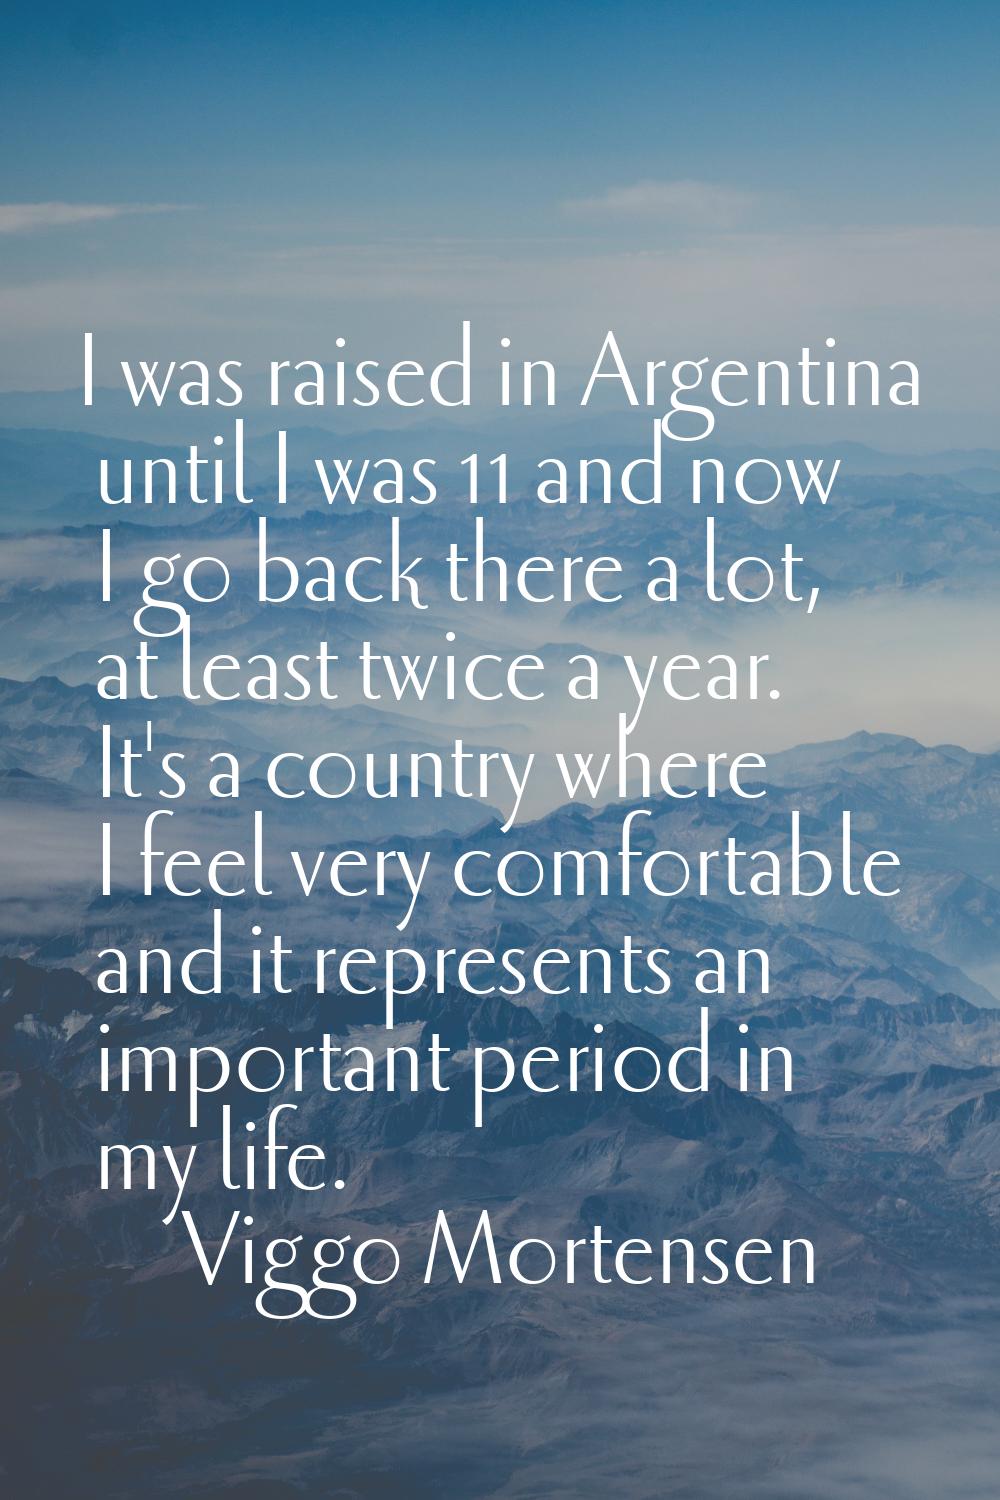 I was raised in Argentina until I was 11 and now I go back there a lot, at least twice a year. It's